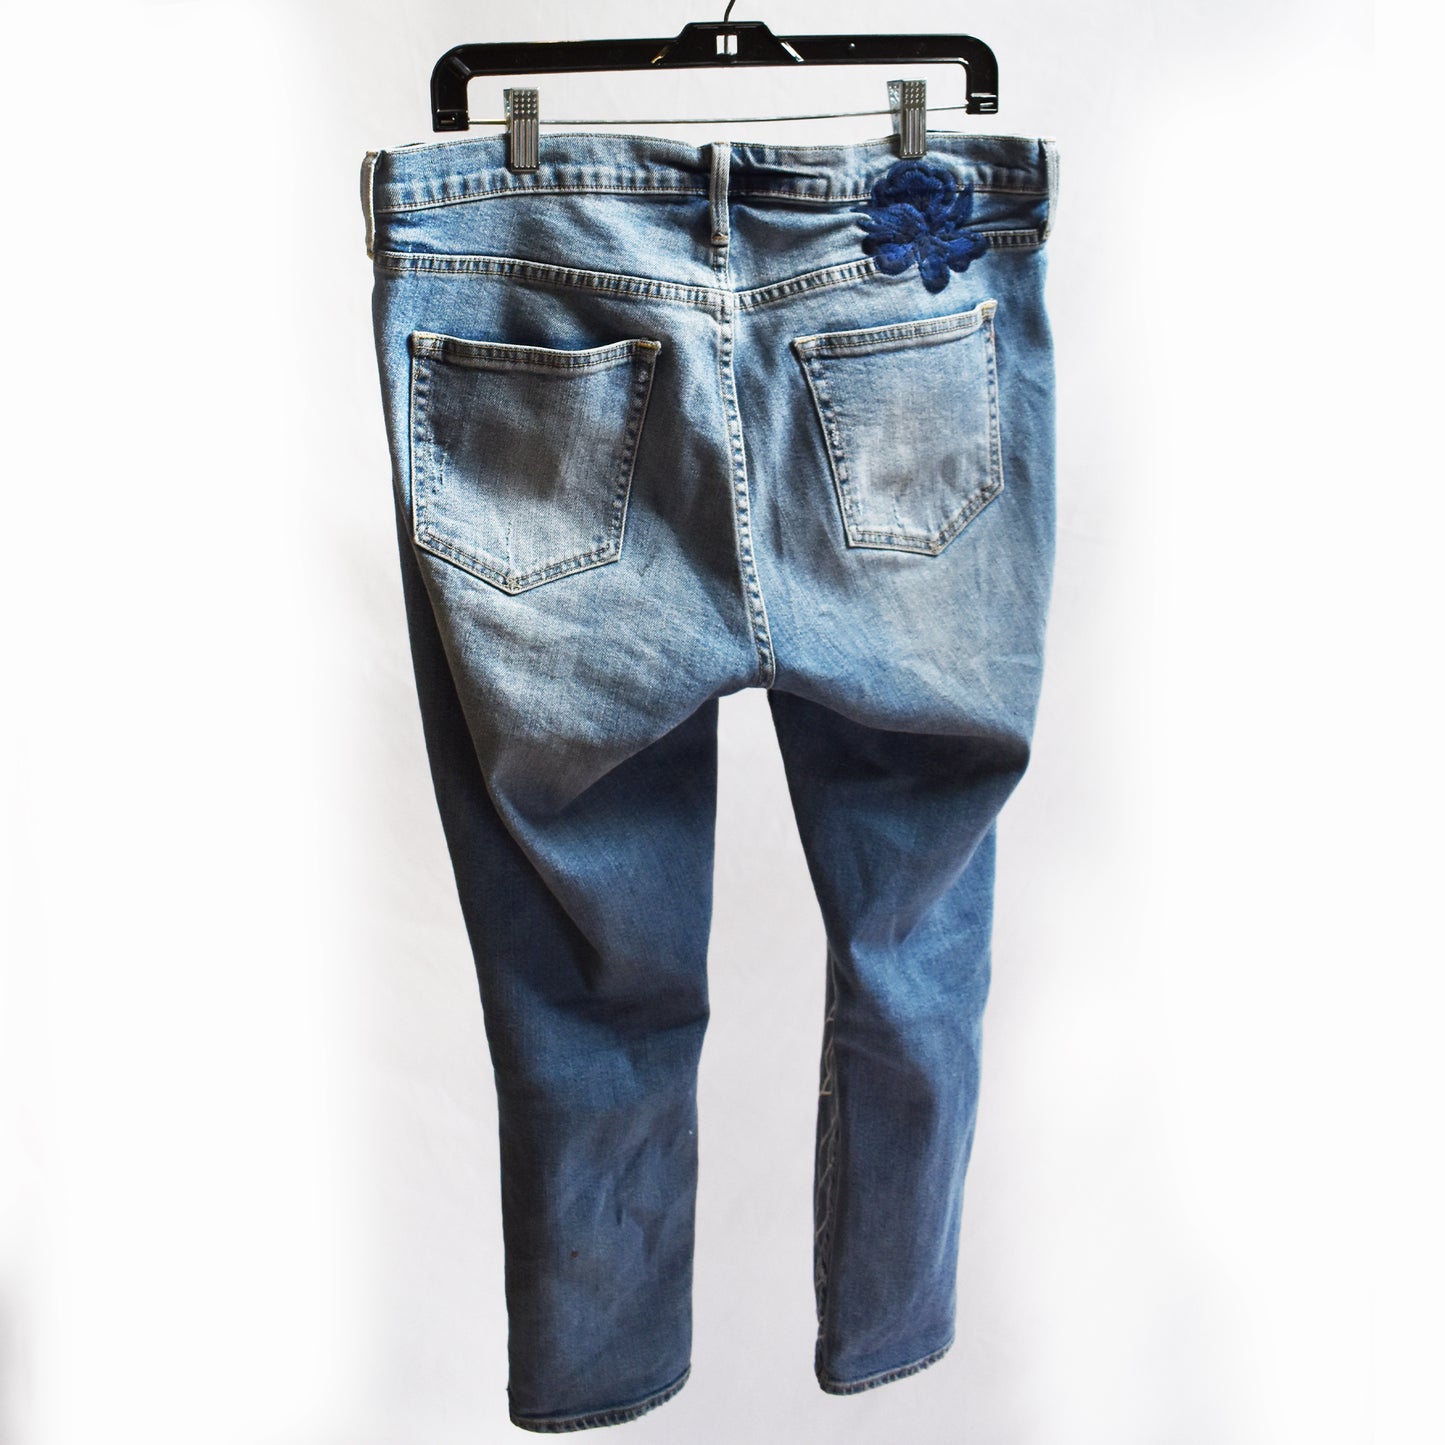 Neural Network Jeans - Size 32 Regular by Isabel Zoe